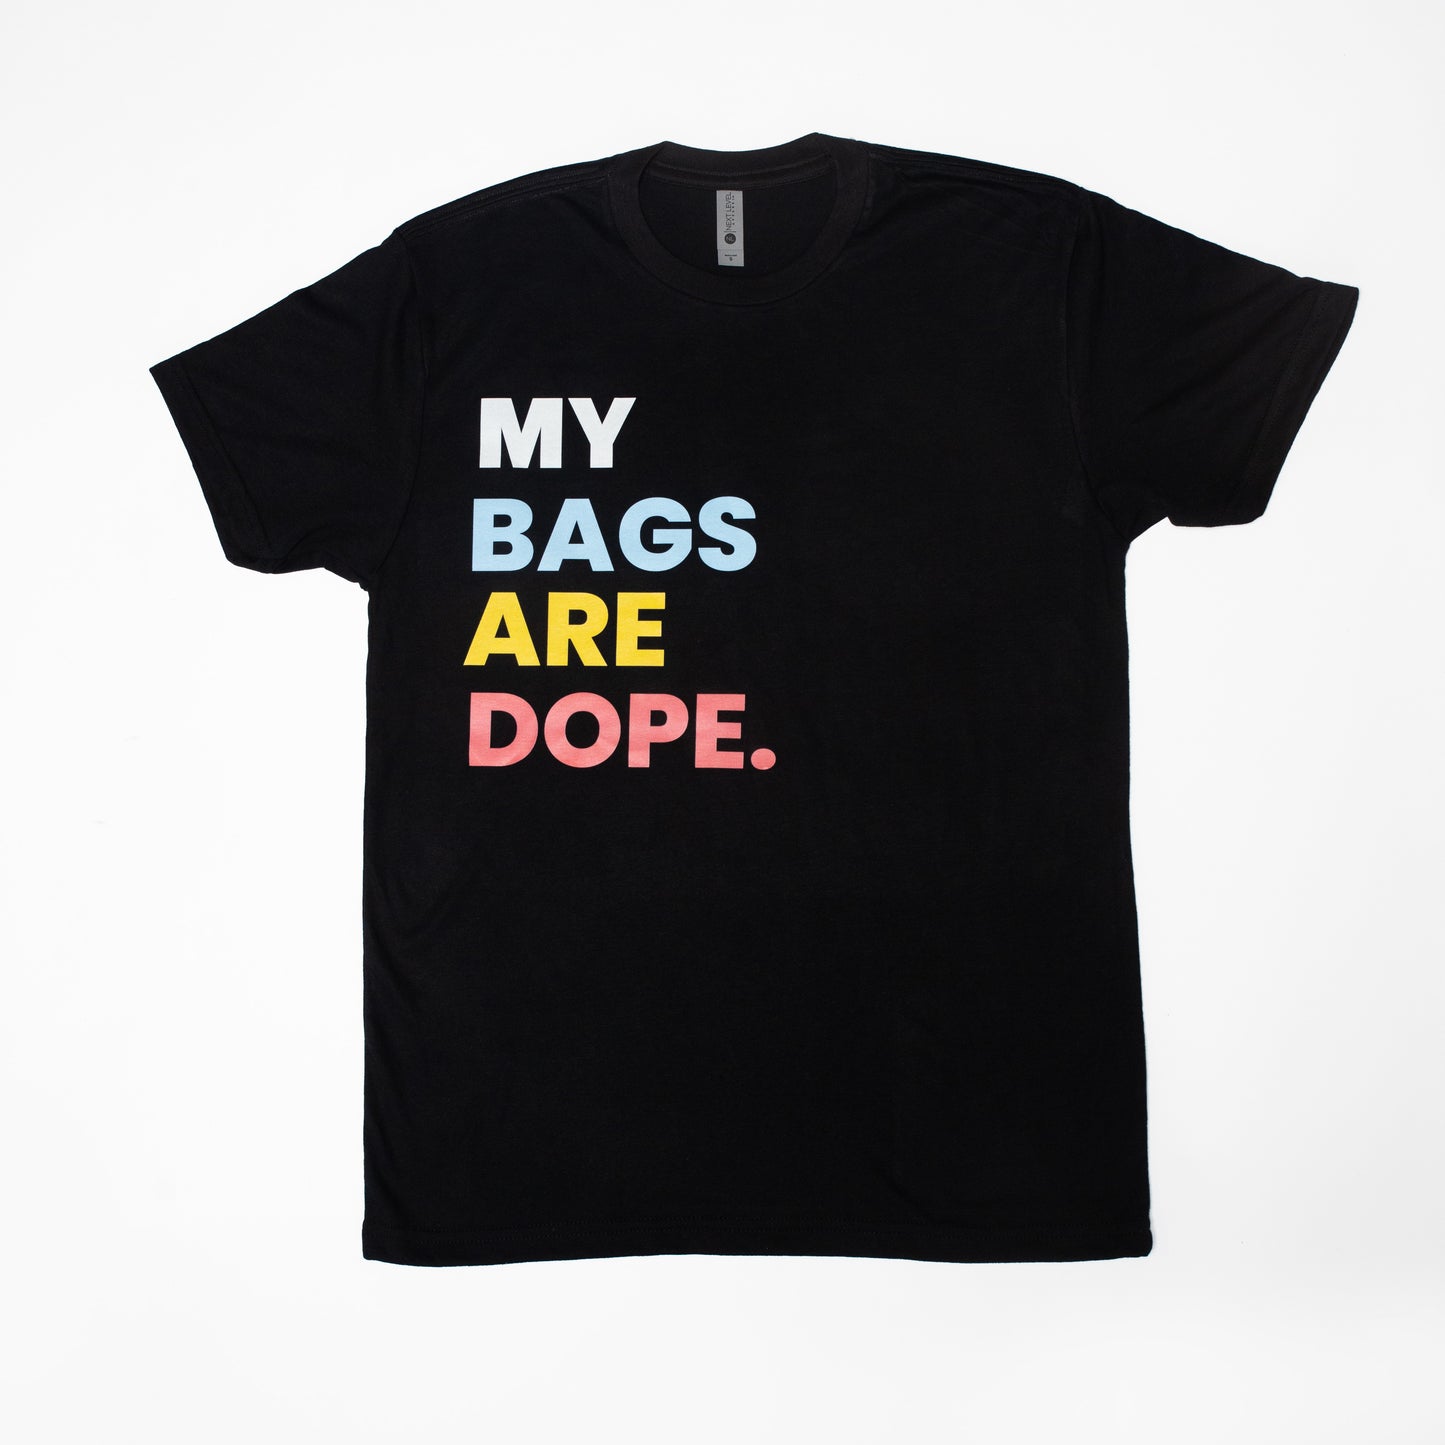 My Bags Are Dope Tee - Black